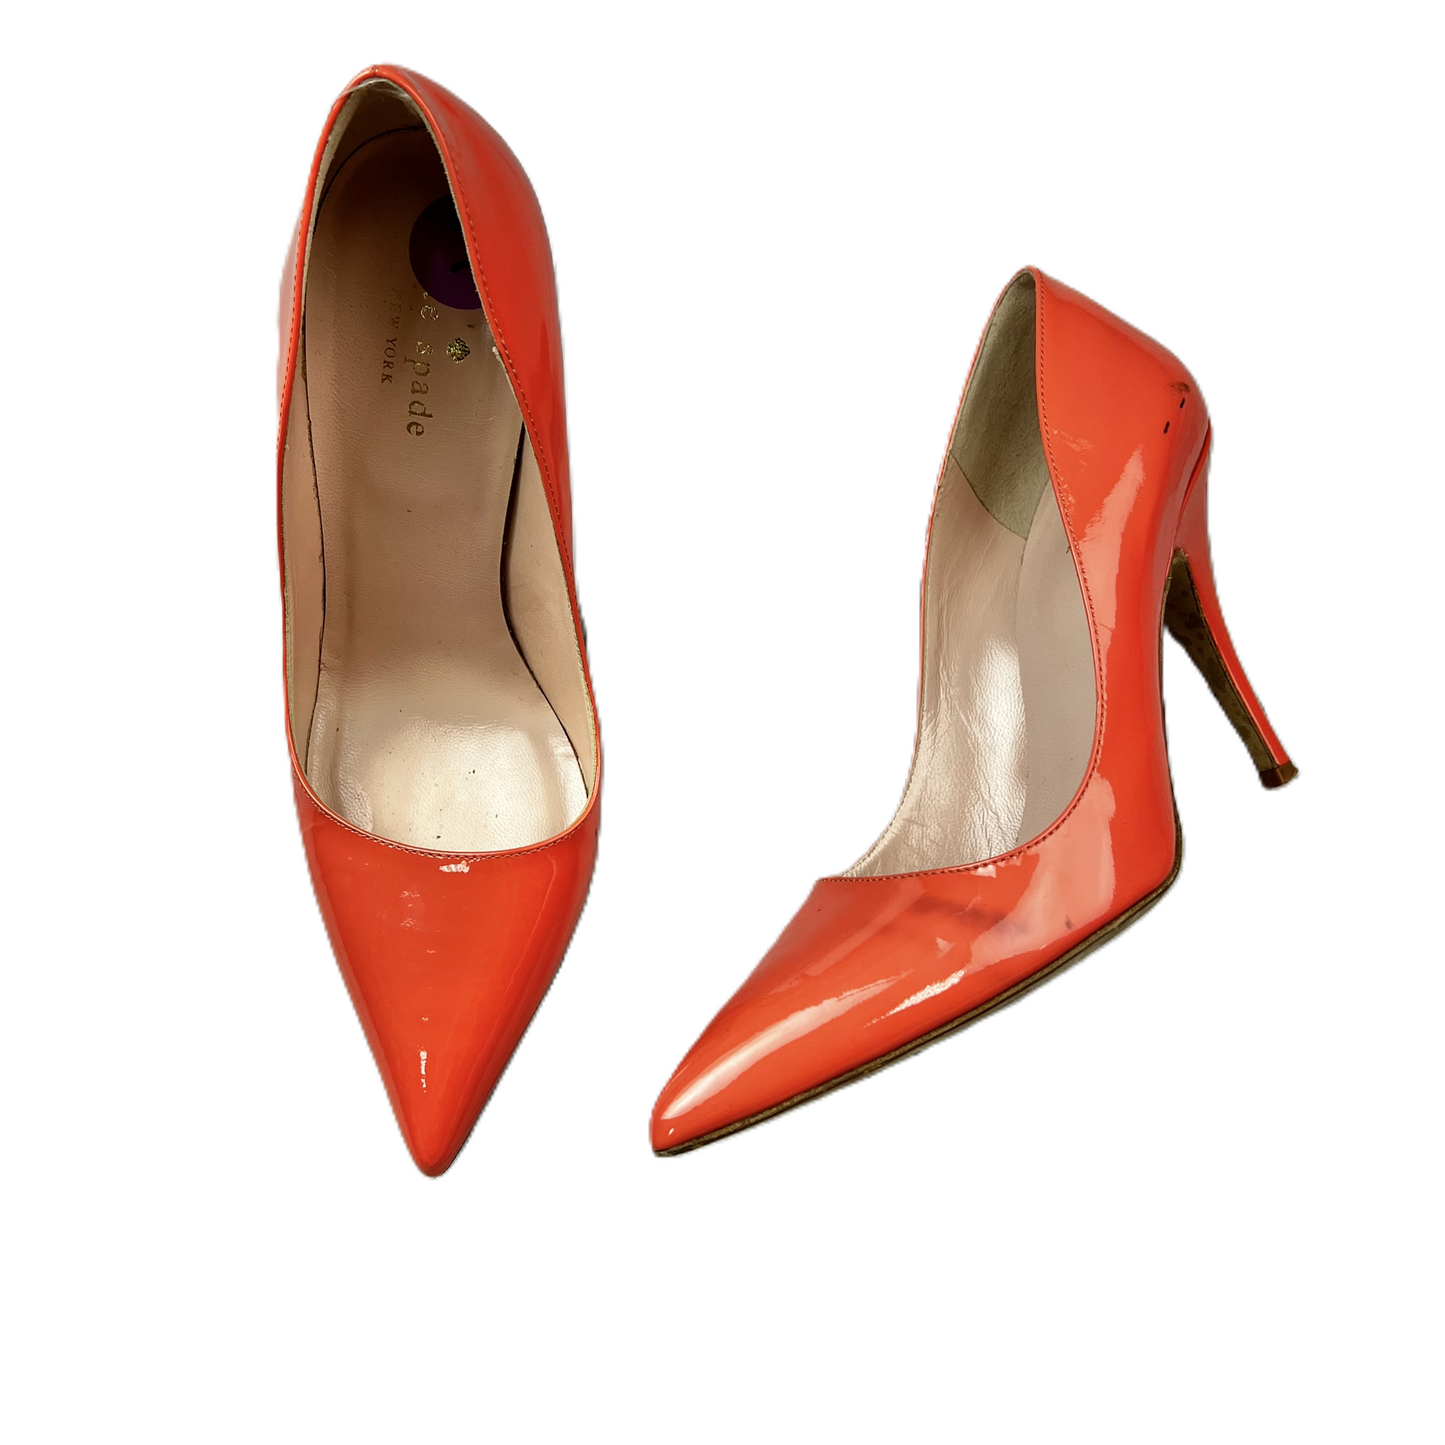 Coral Shoes Heels Stiletto By Kate Spade, Size: 7